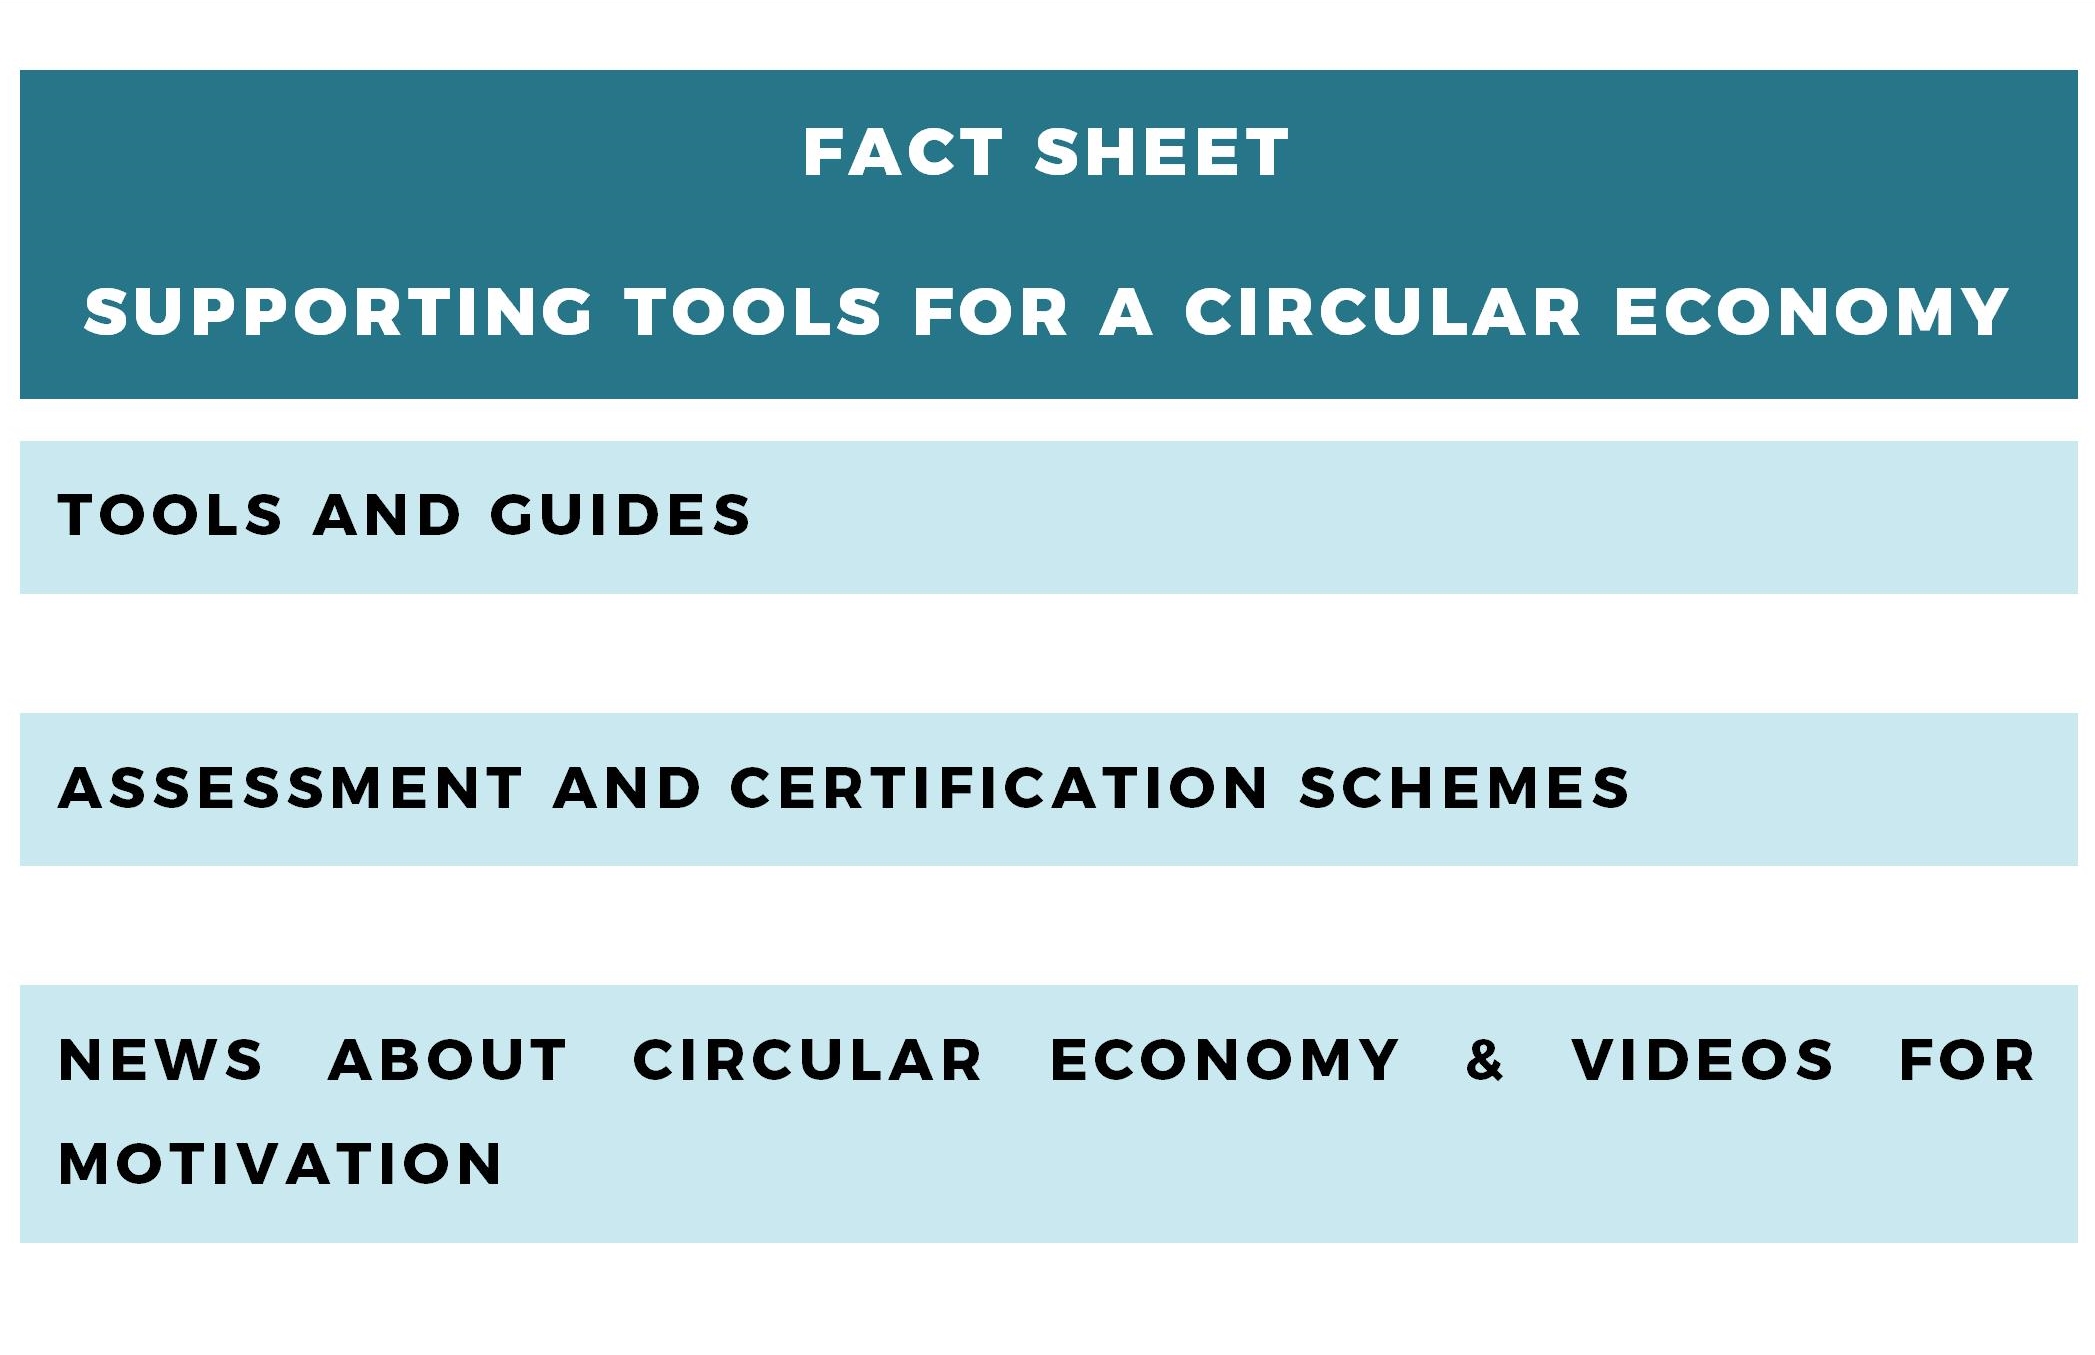 Fact Sheet "Supporting tools for a circular economy"